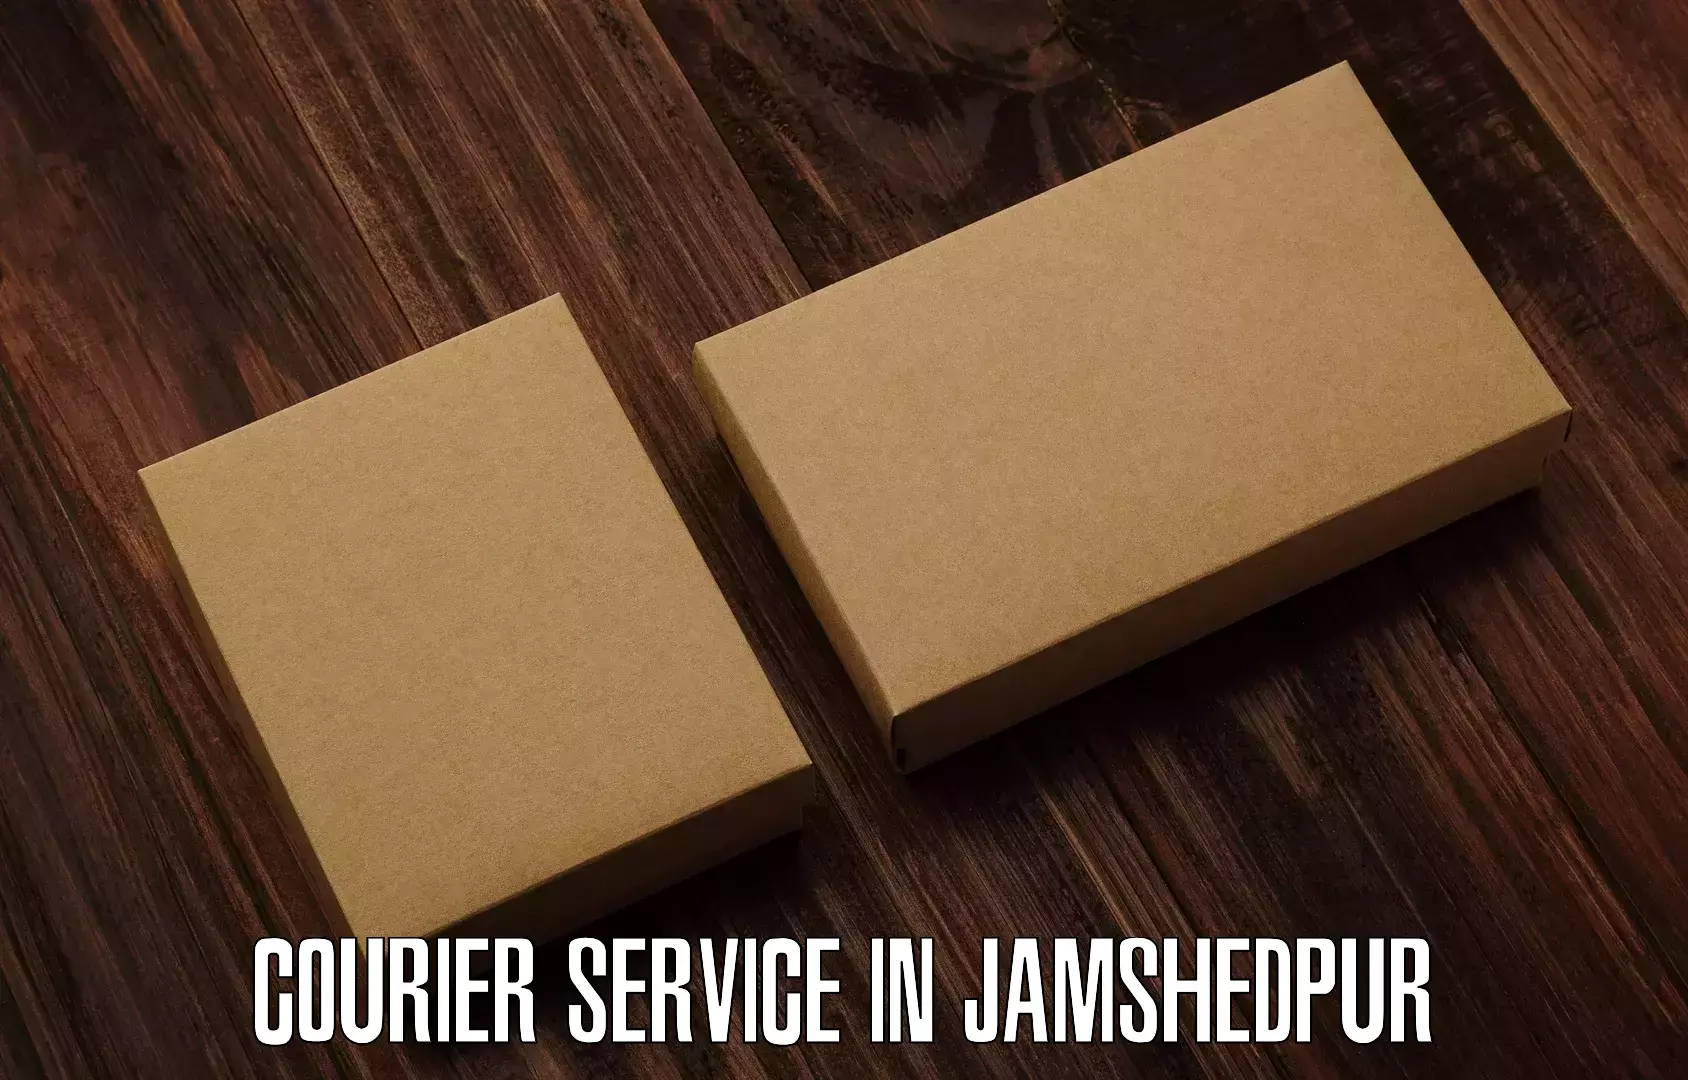 Expedited shipping methods in Jamshedpur